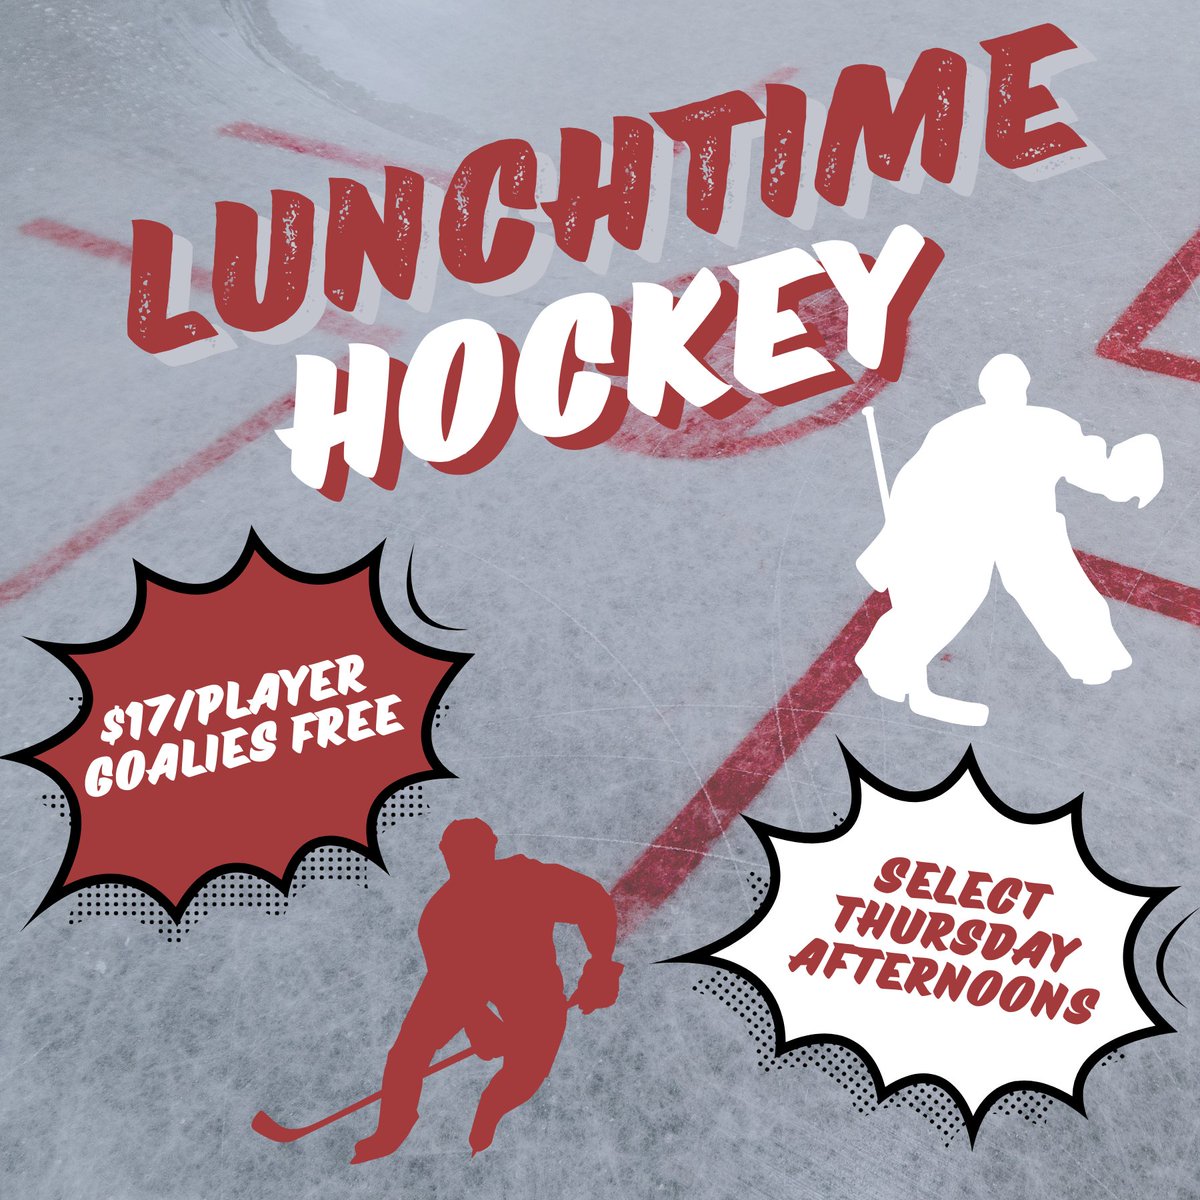 REMINDER: Our first Lunchtime Hockey session is this Thursday @ 12pm! Enjoy a friendly matinee pick-up game with other local players. Register now--> bit.ly/LTHCKY